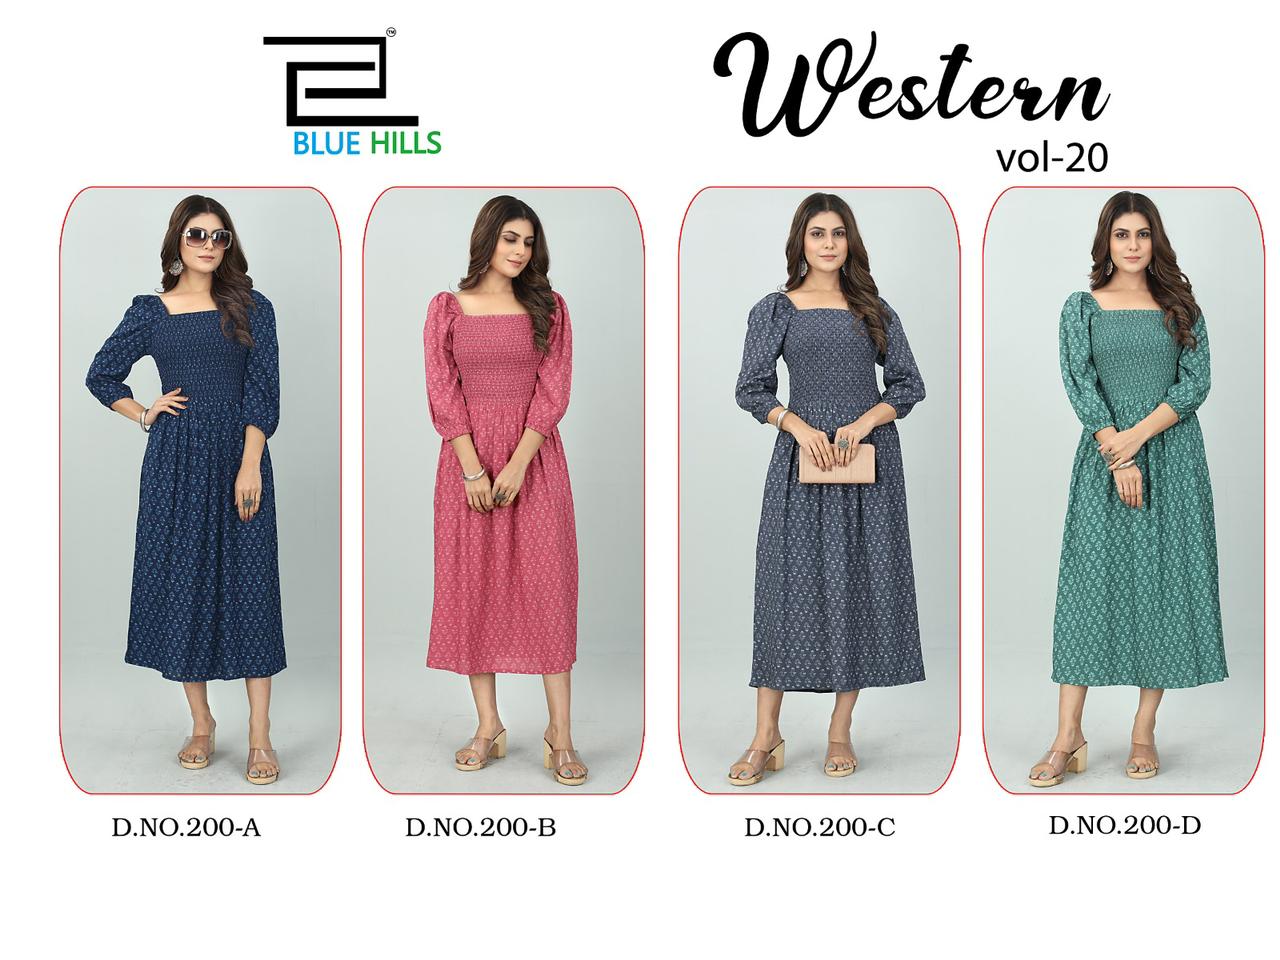 Blue Hills Western Vol 20 collection 1